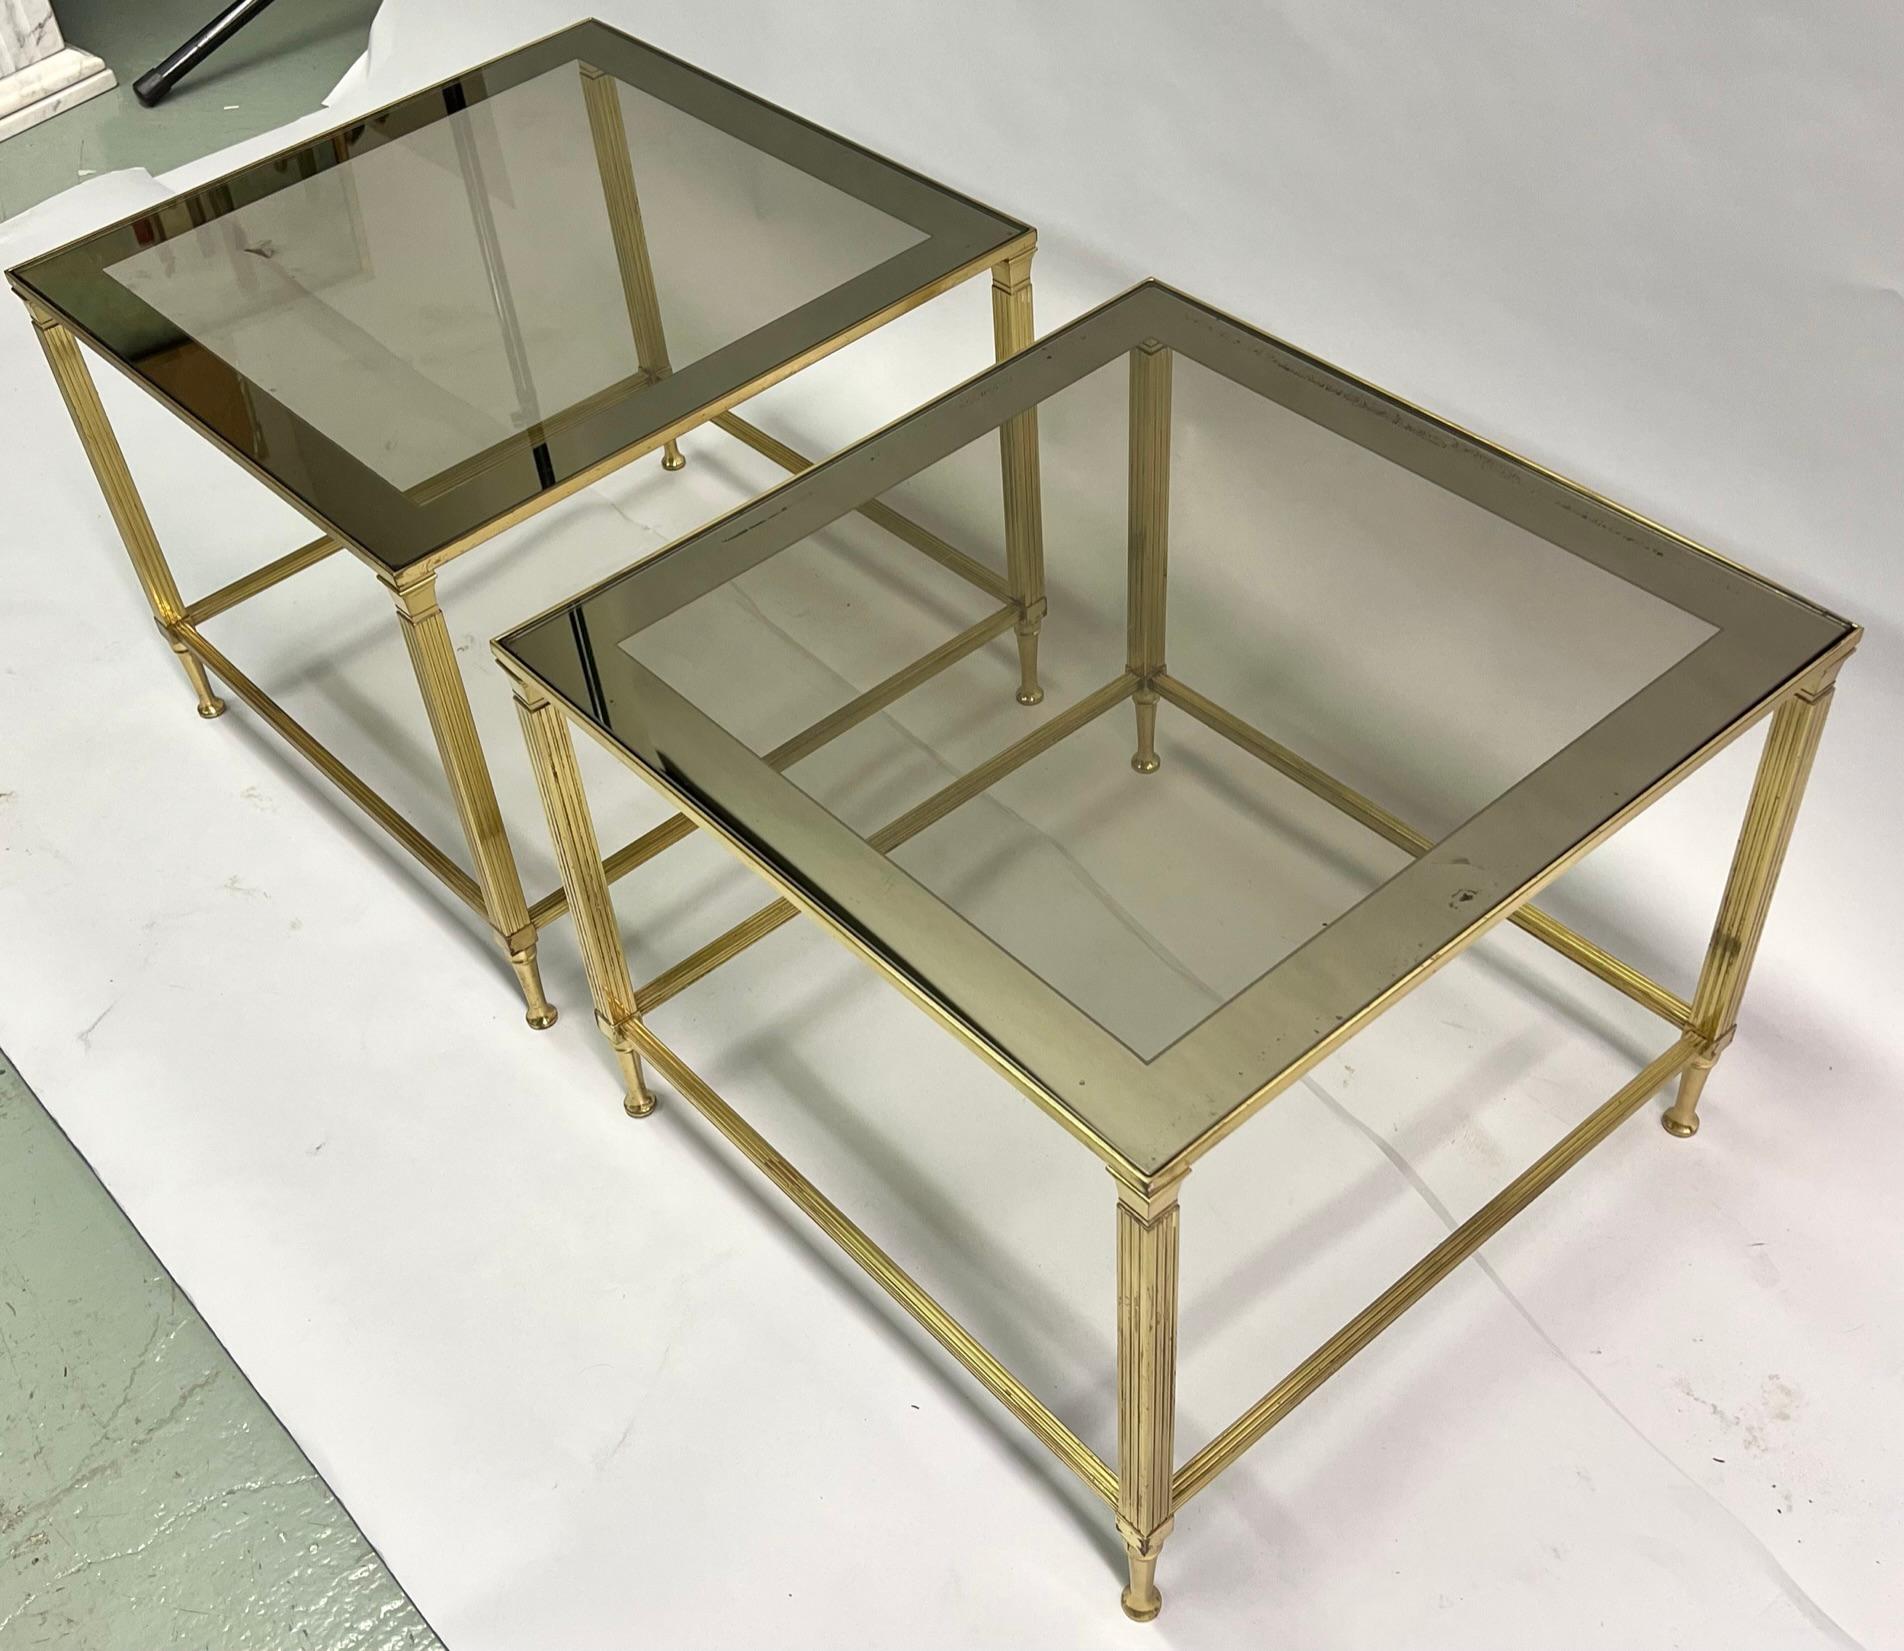 Pair of French Mid-Century brass end or side tables in the modern neoclassical style attributed to Maison Jansen. The pieces are constructed in brass and have delicate fluted pilaster legs and tapered sabots. The tops are composed of smoked glass